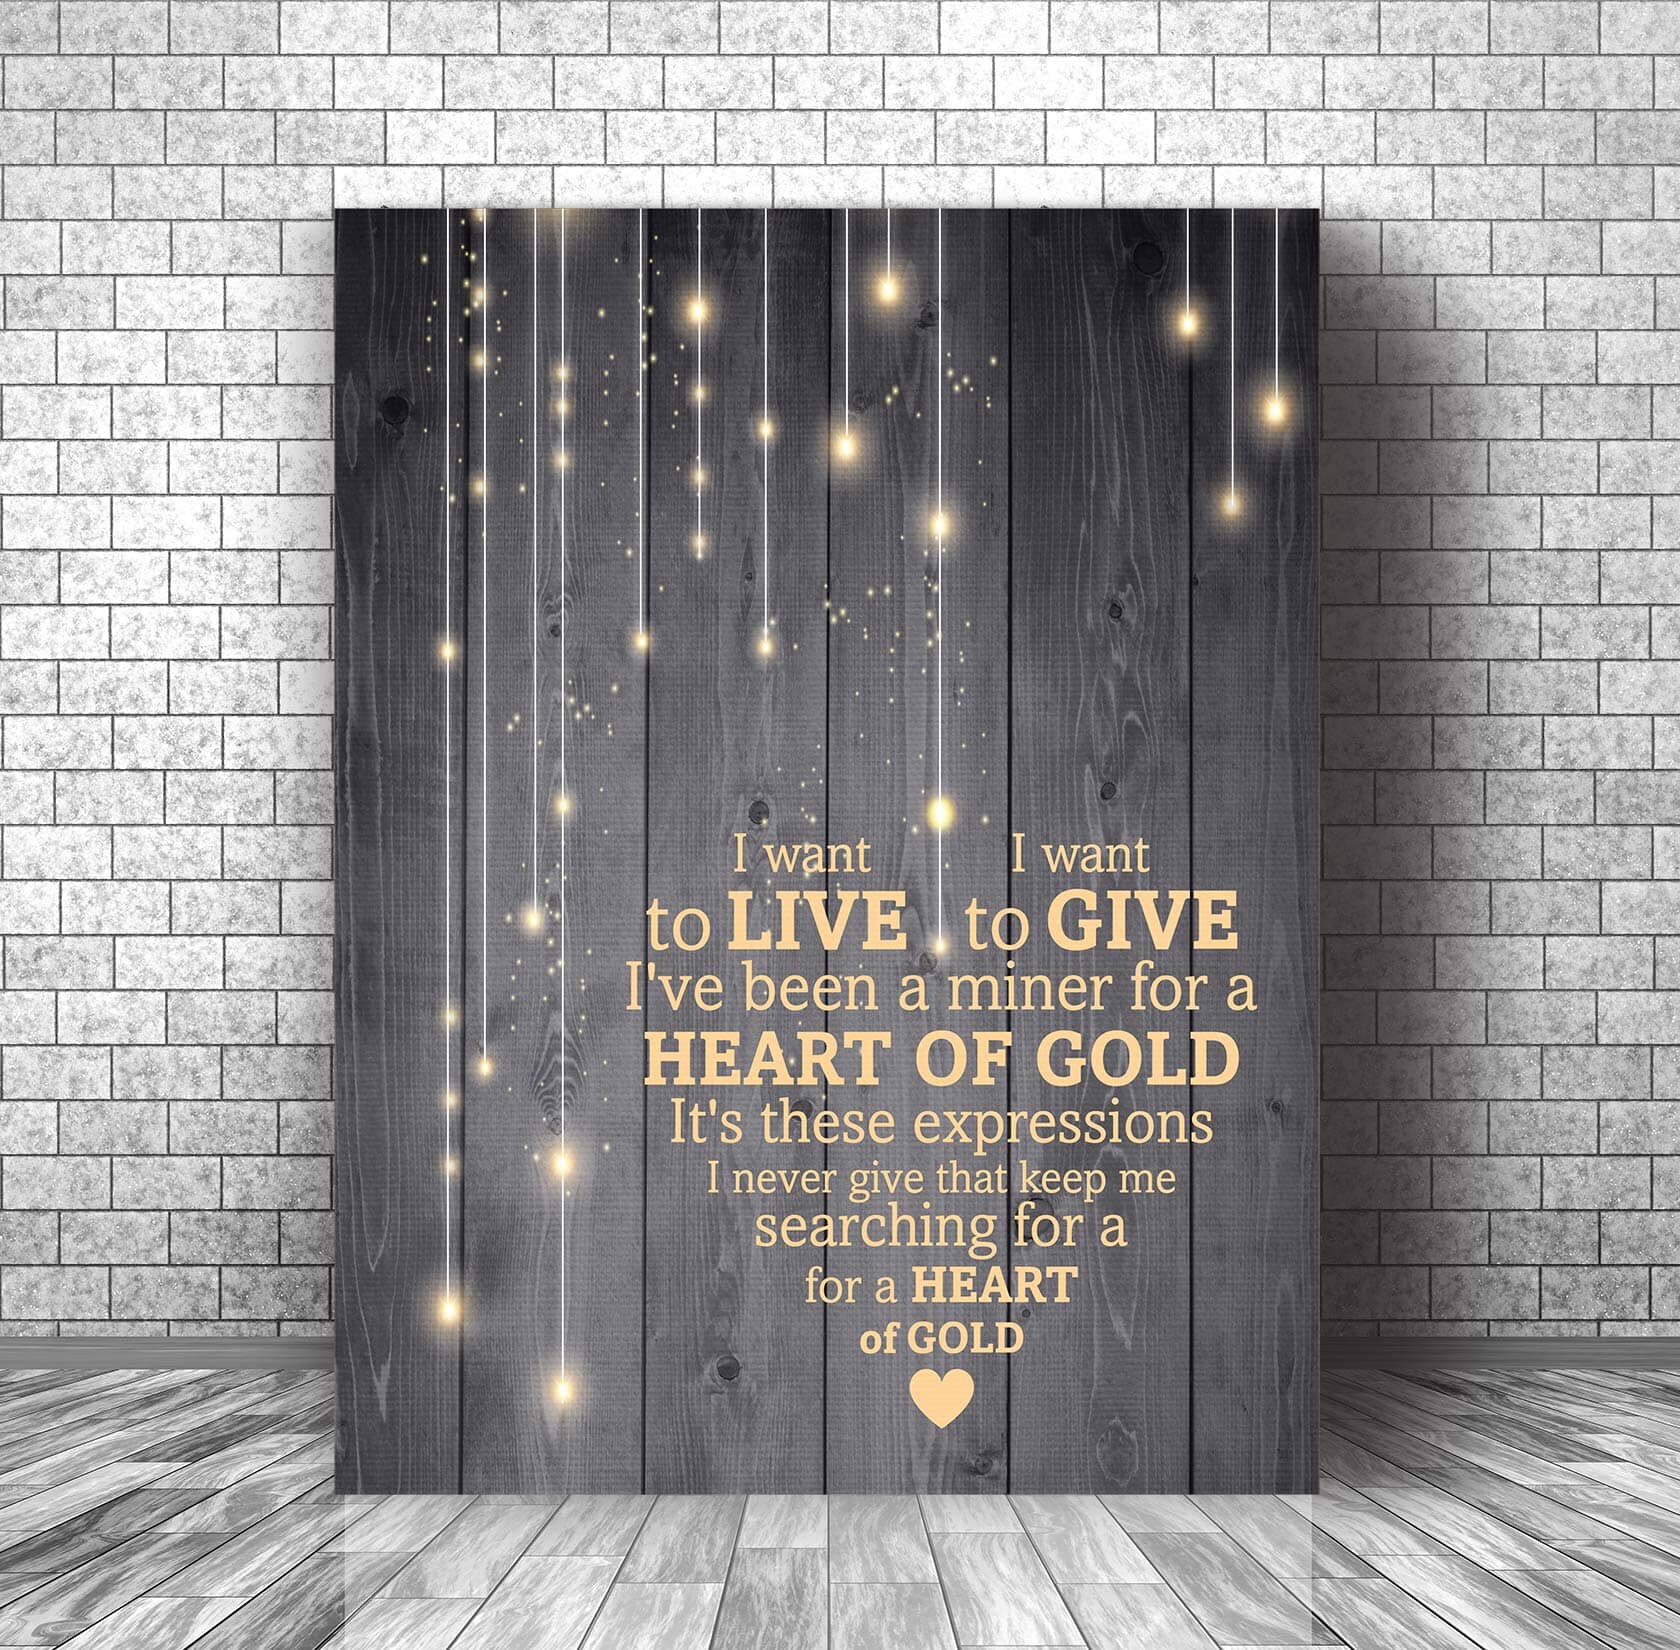 Heart of Gold by Neil Young - Lyric Song Art Wall Print Song Lyrics Art Song Lyrics Art 11x14 Canvas Wrap 